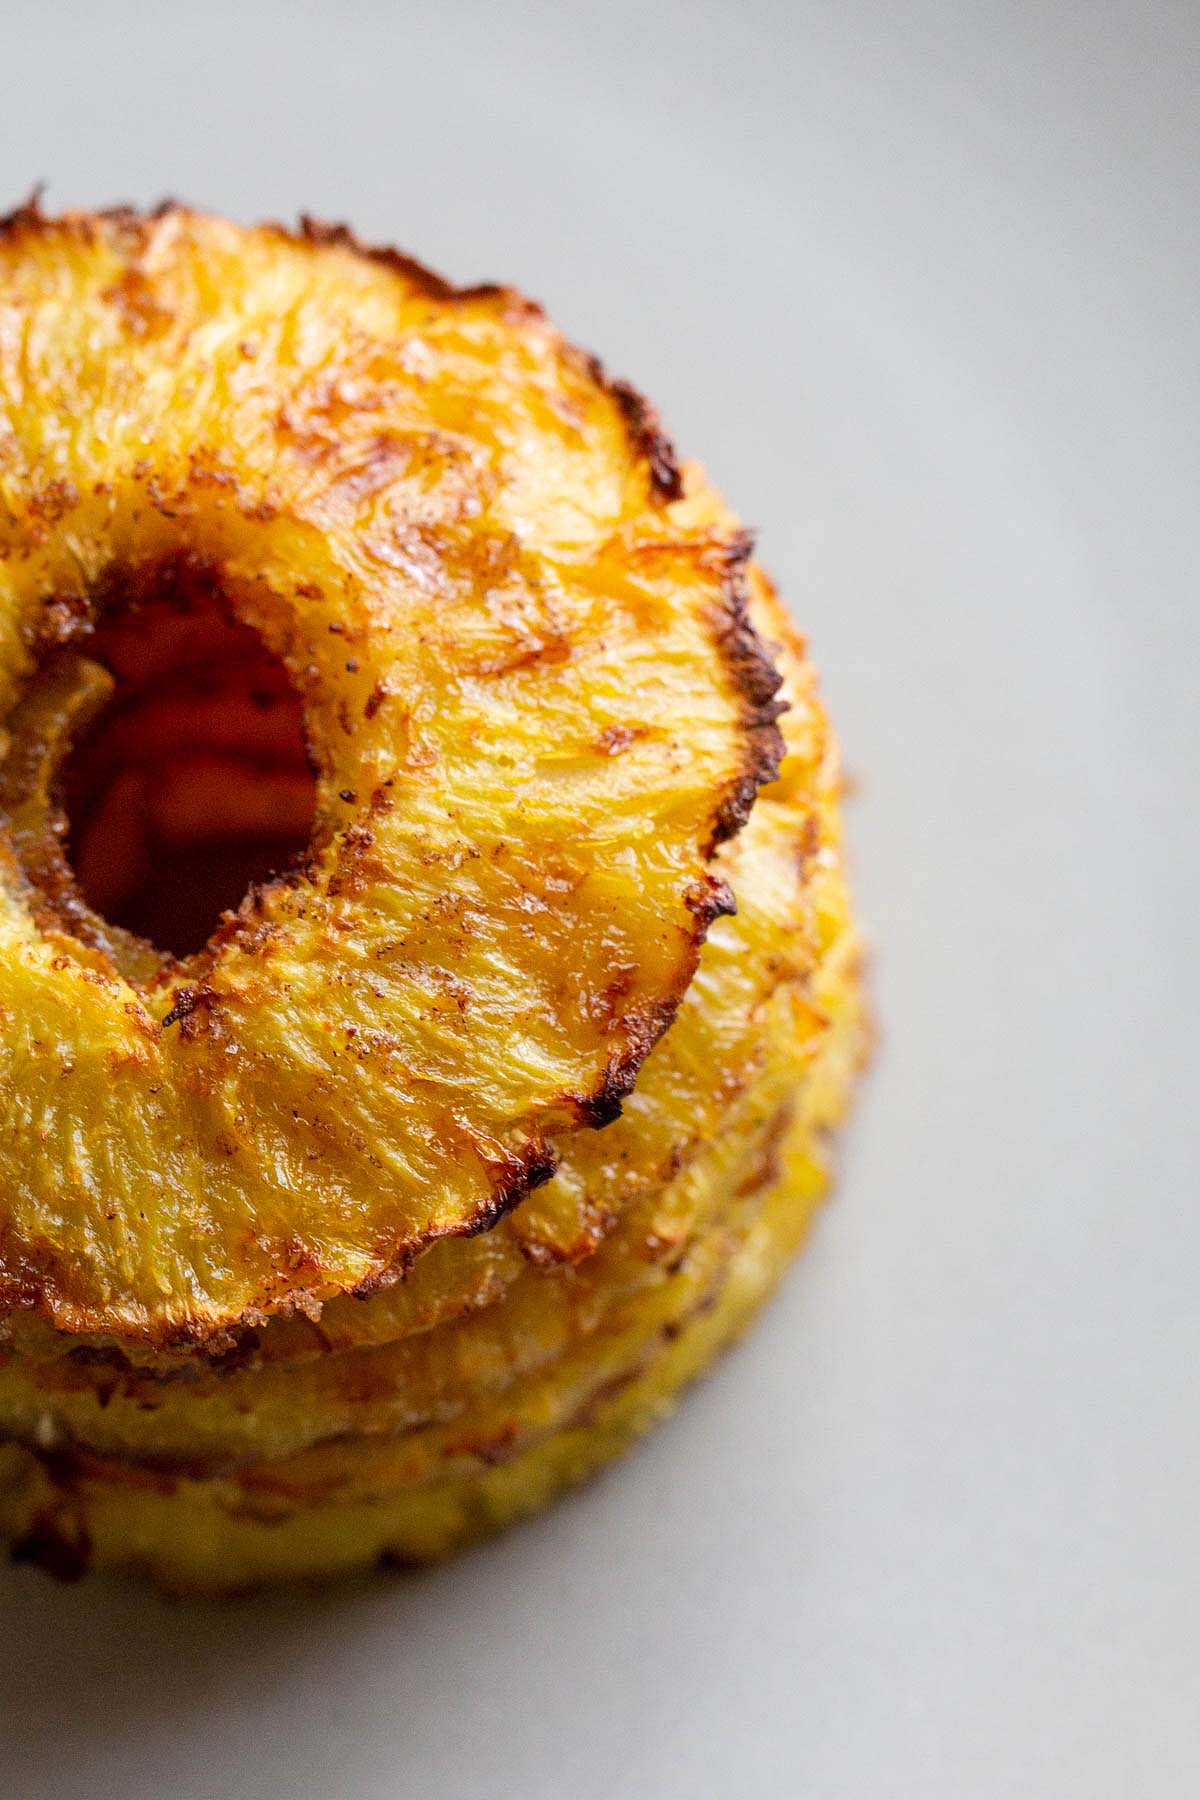 Grilled pineapple from above.